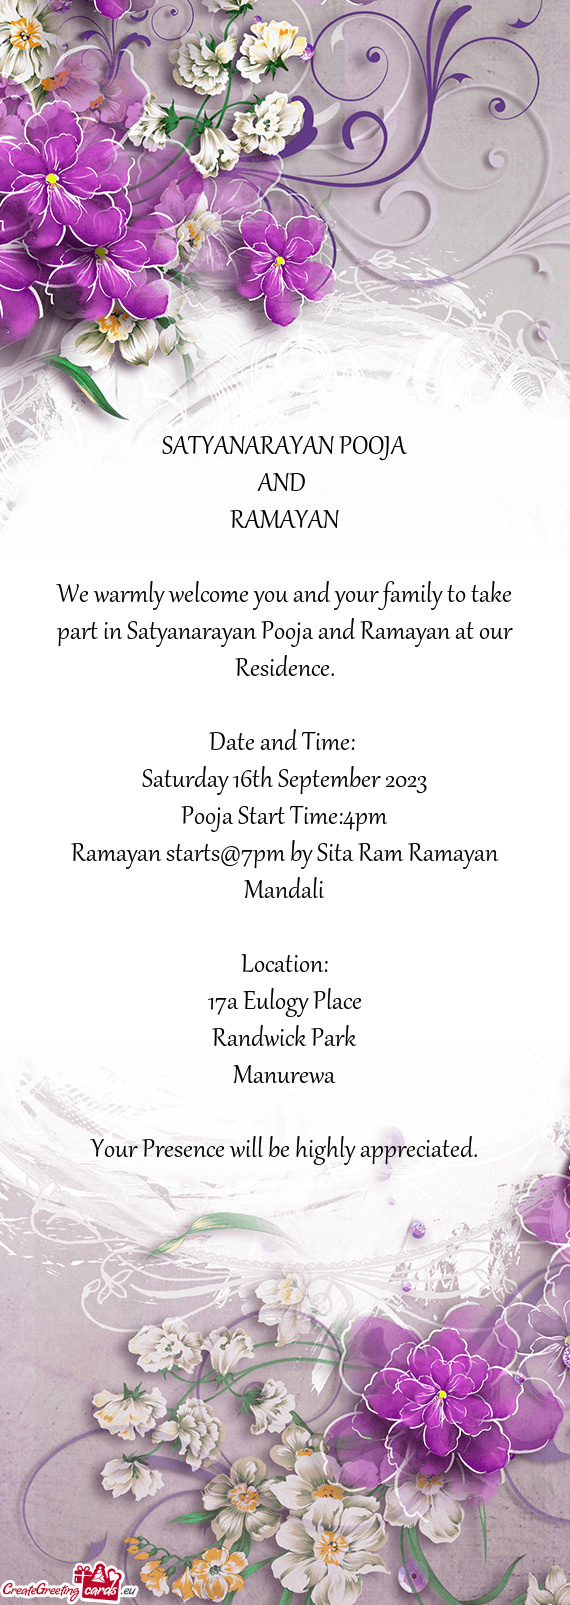 We warmly welcome you and your family to take part in Satyanarayan Pooja and Ramayan at our Residenc